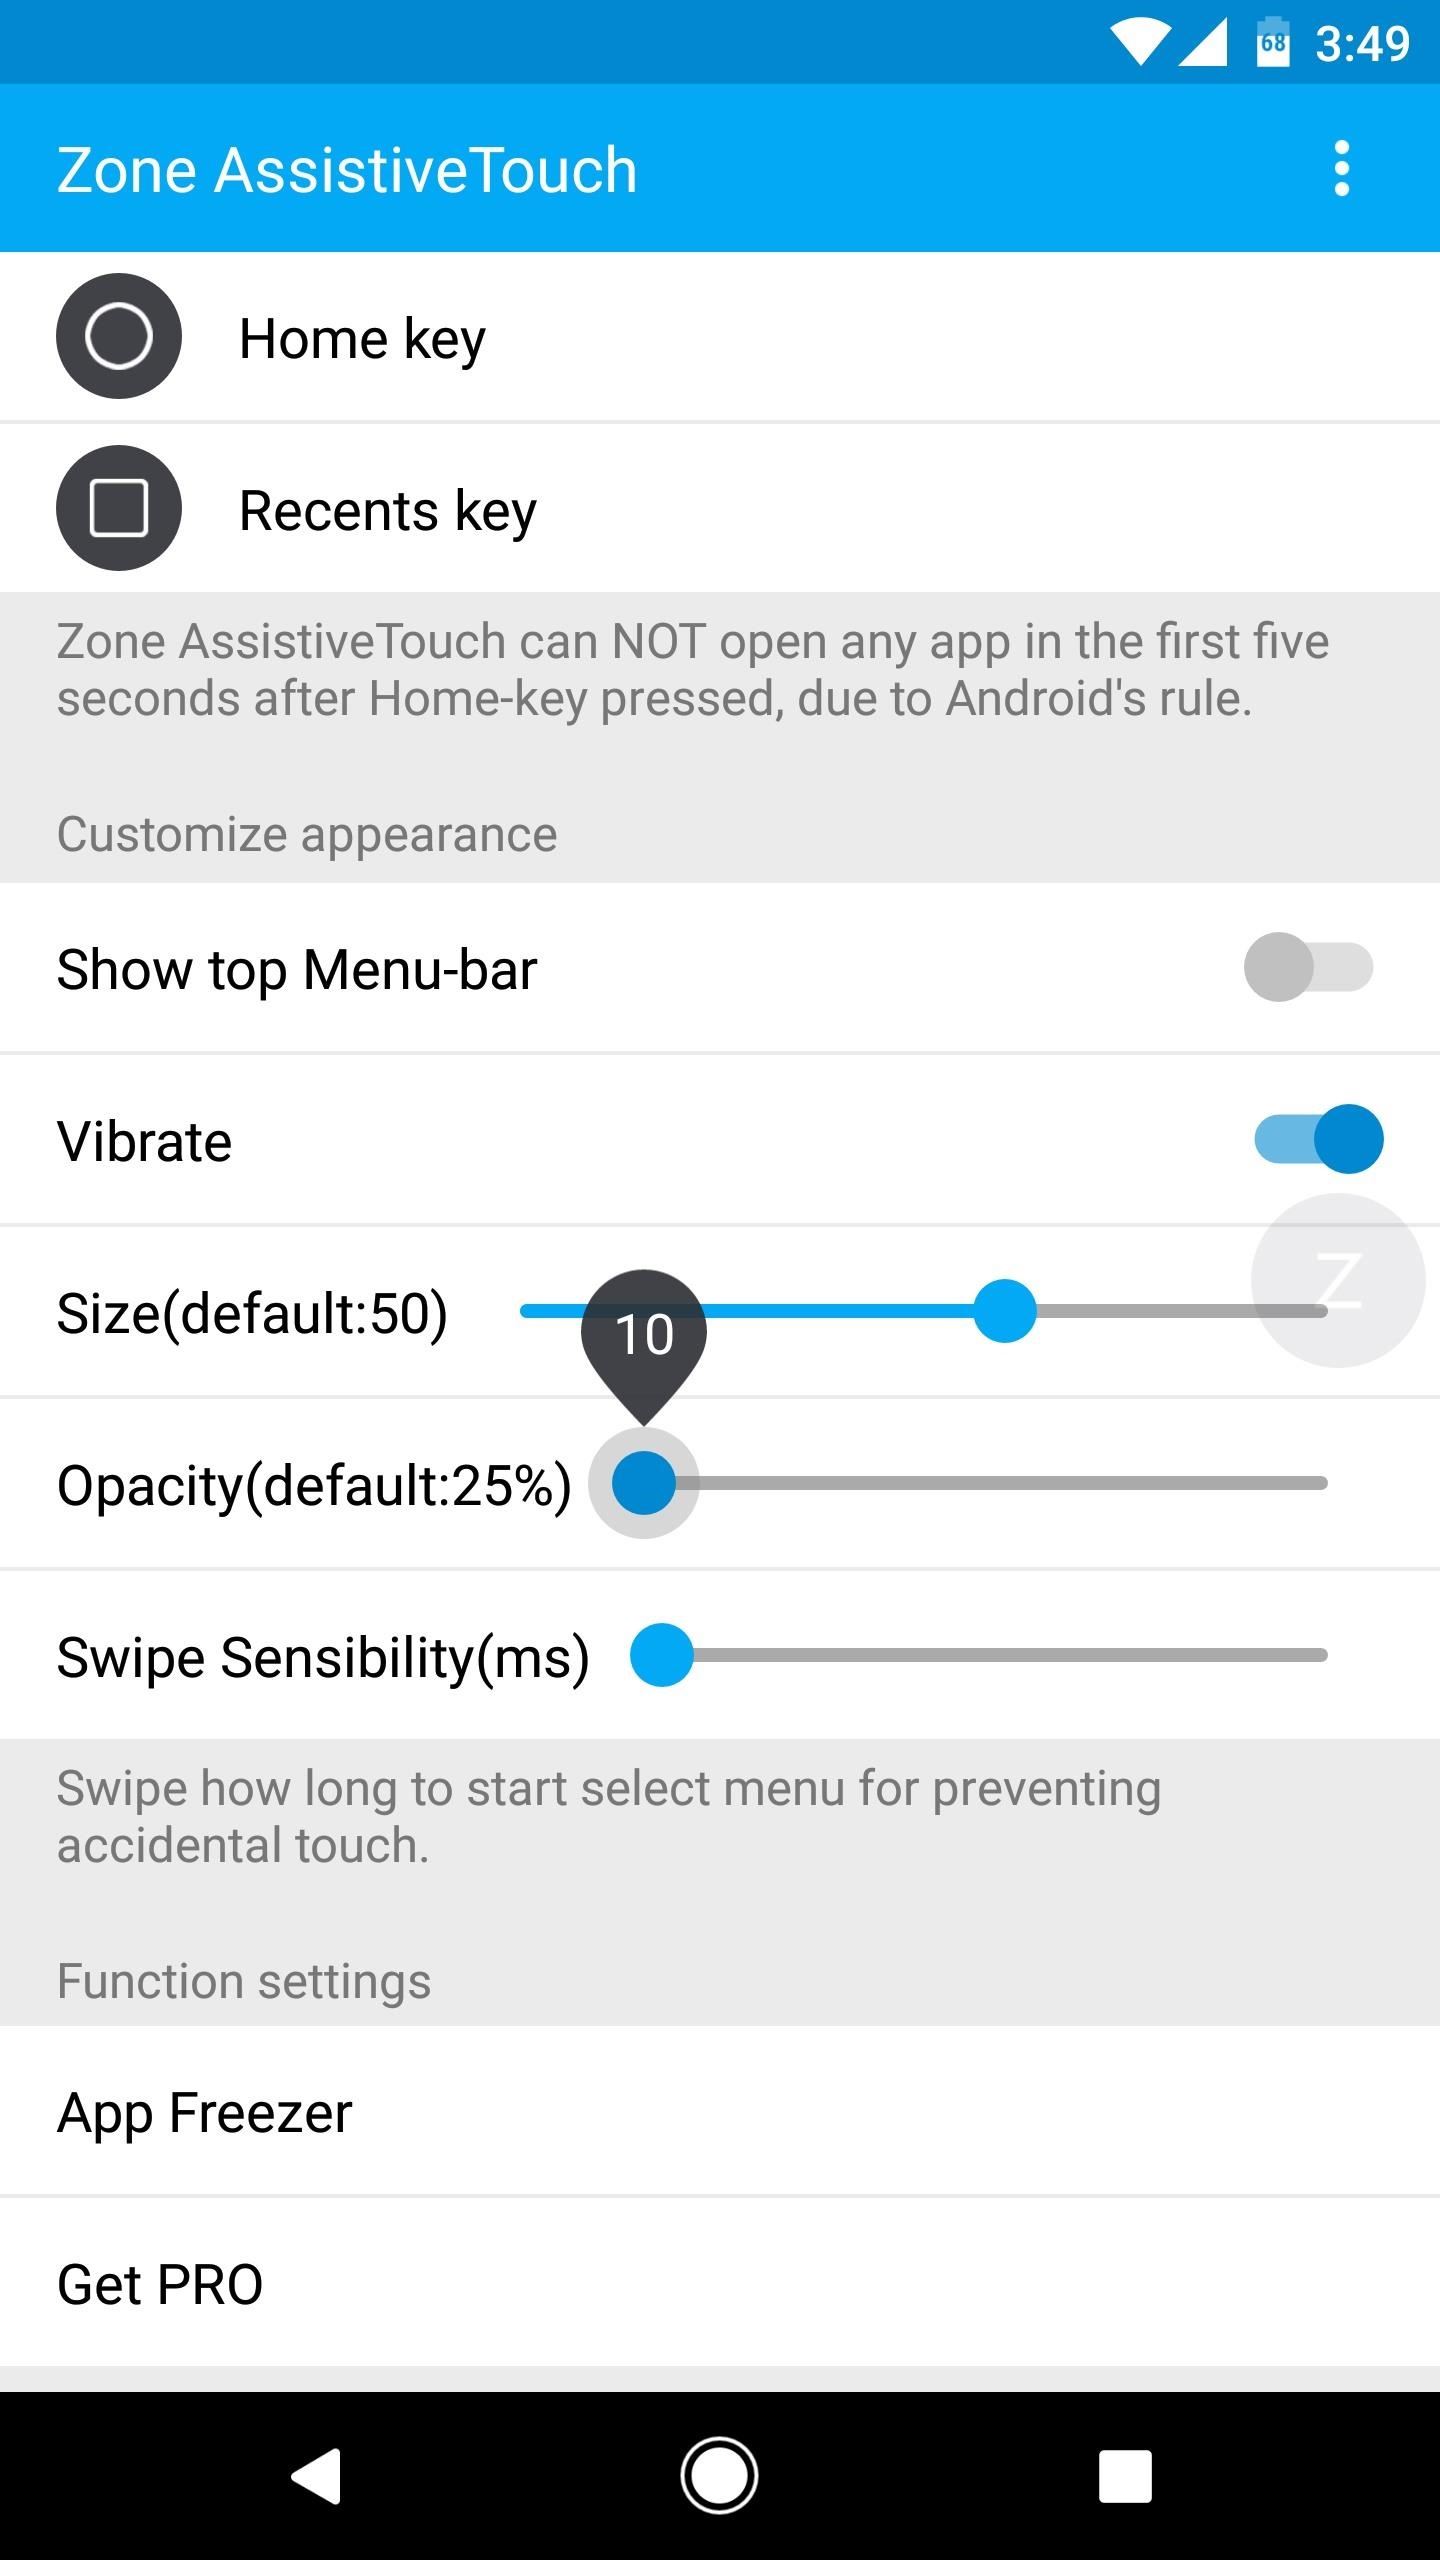 Get MIUI's 'Quick Ball' Navigation Gestures on Any Android